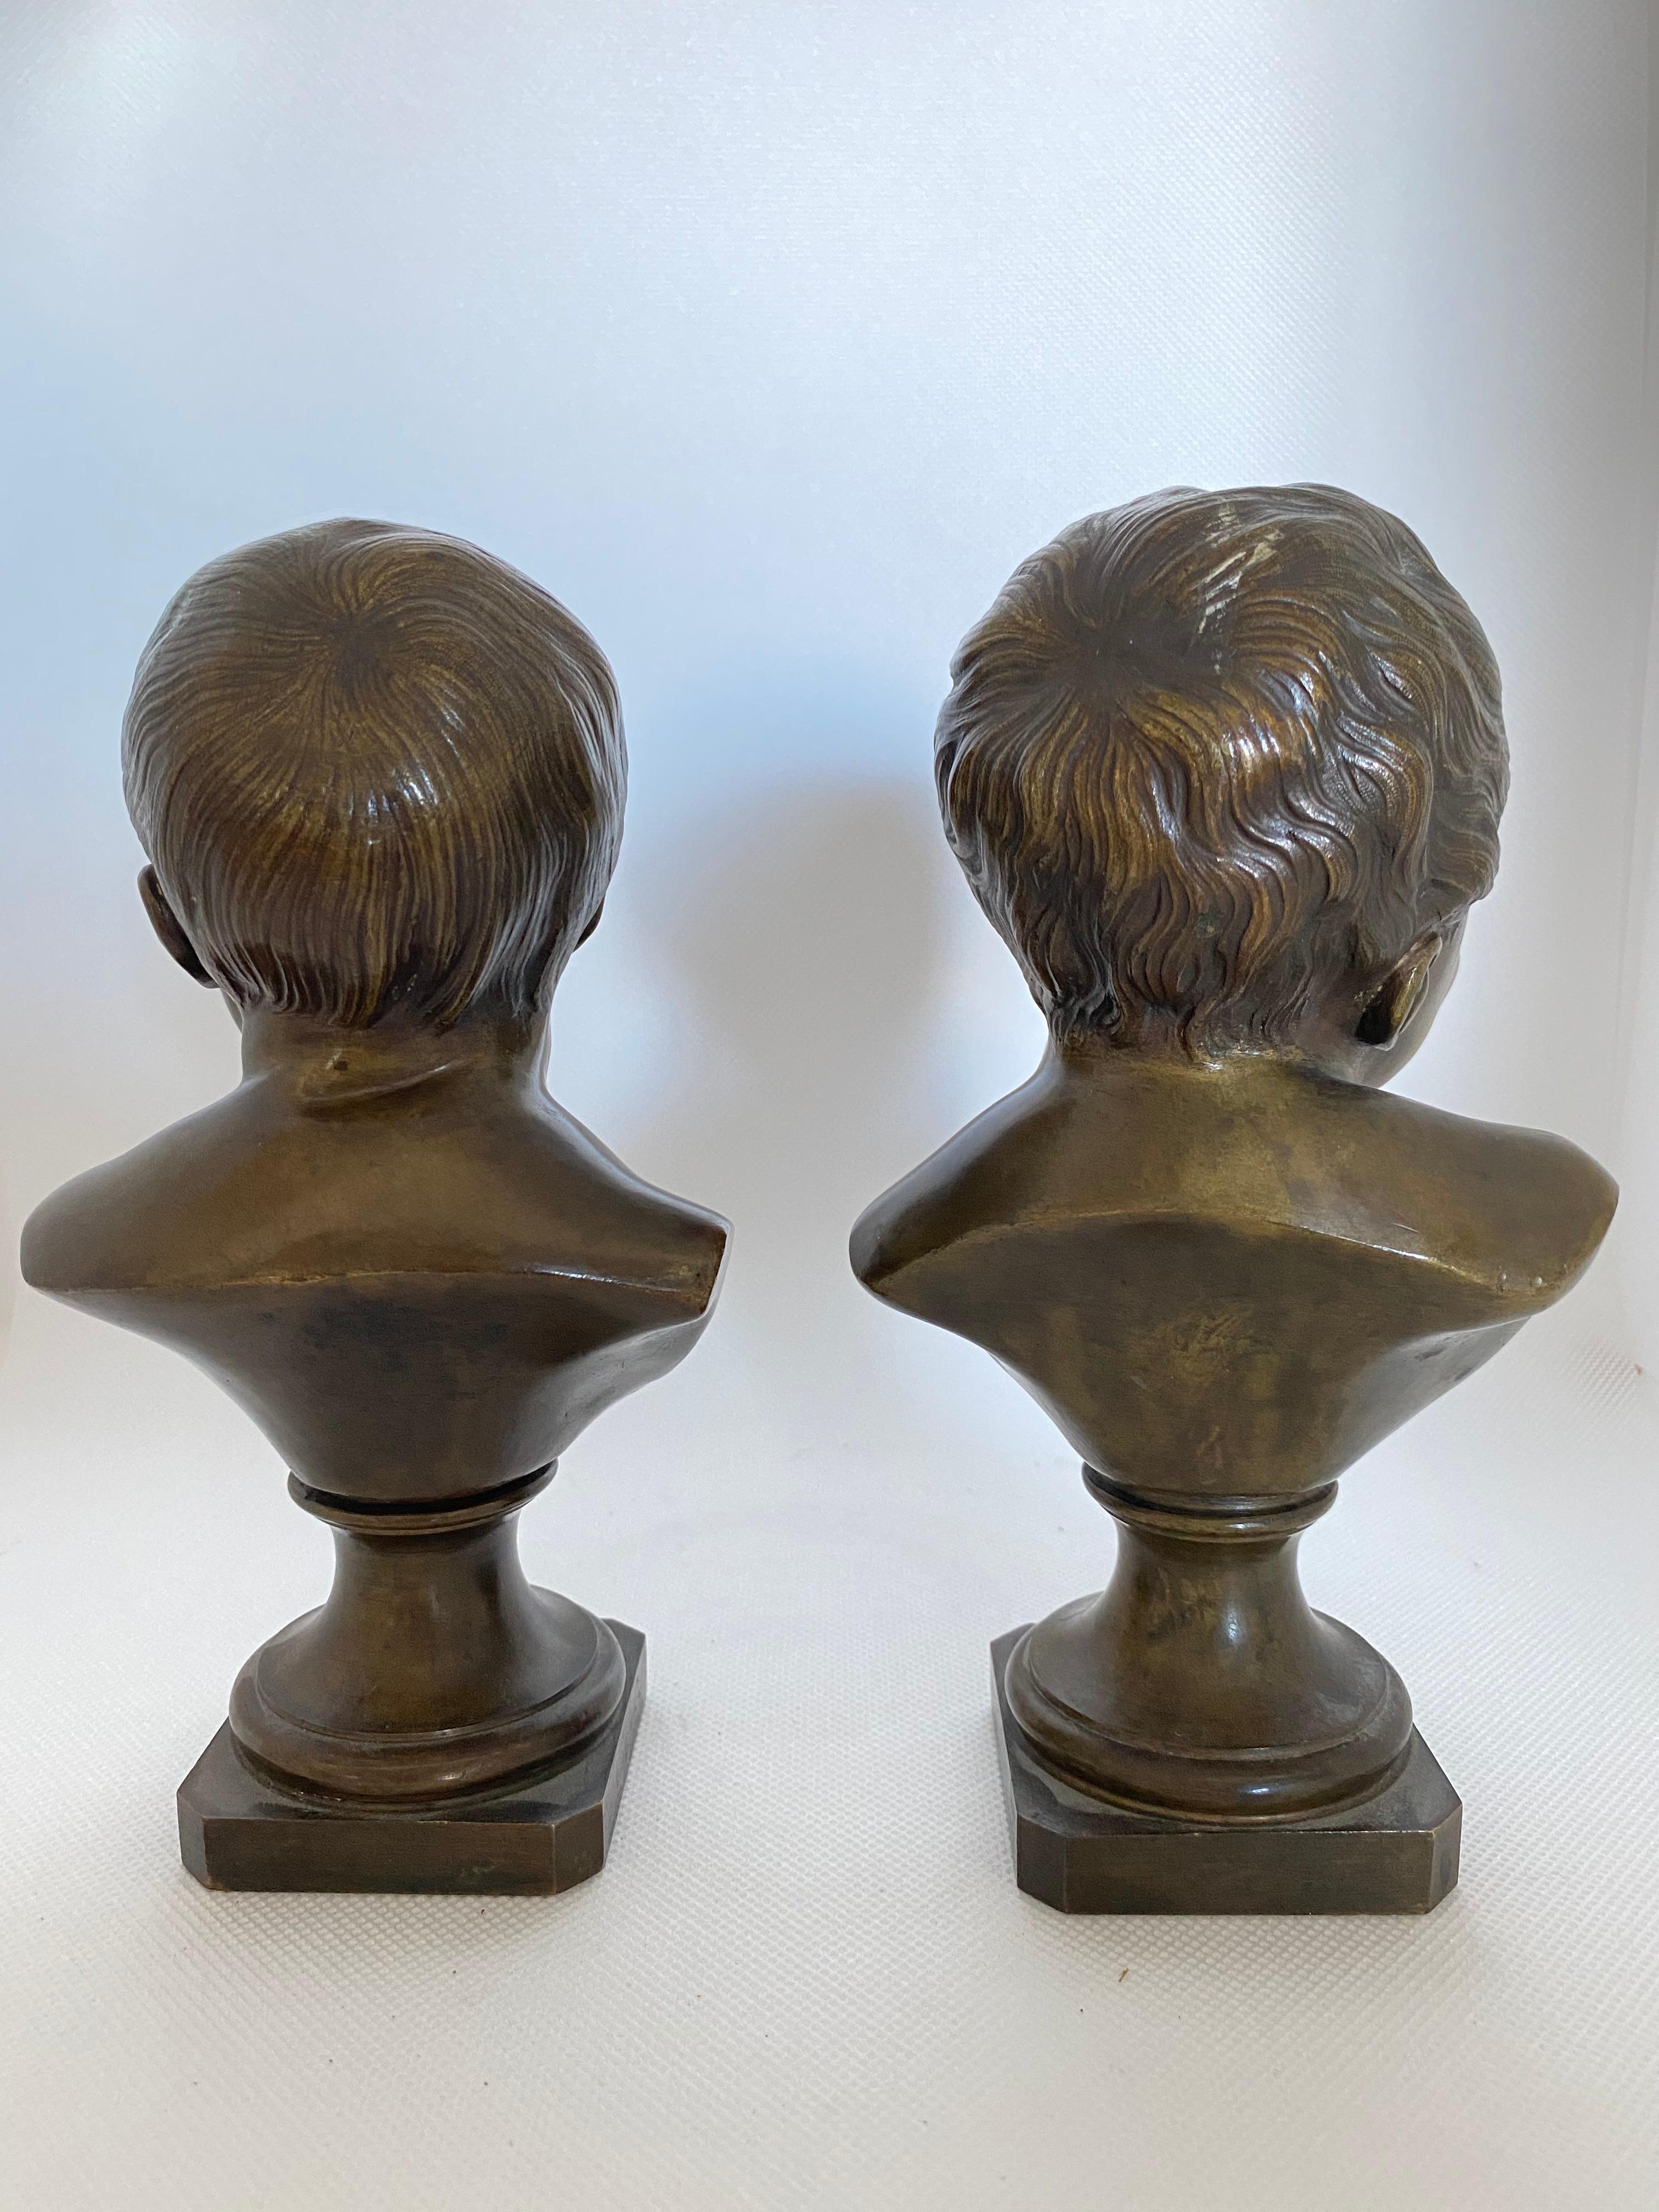 A charming pair of patinated bronze infants cast in the 19th century. One of the babies is happy, while the other one is crying, perhaps corresponding to an 18th century poem by Votaire. 